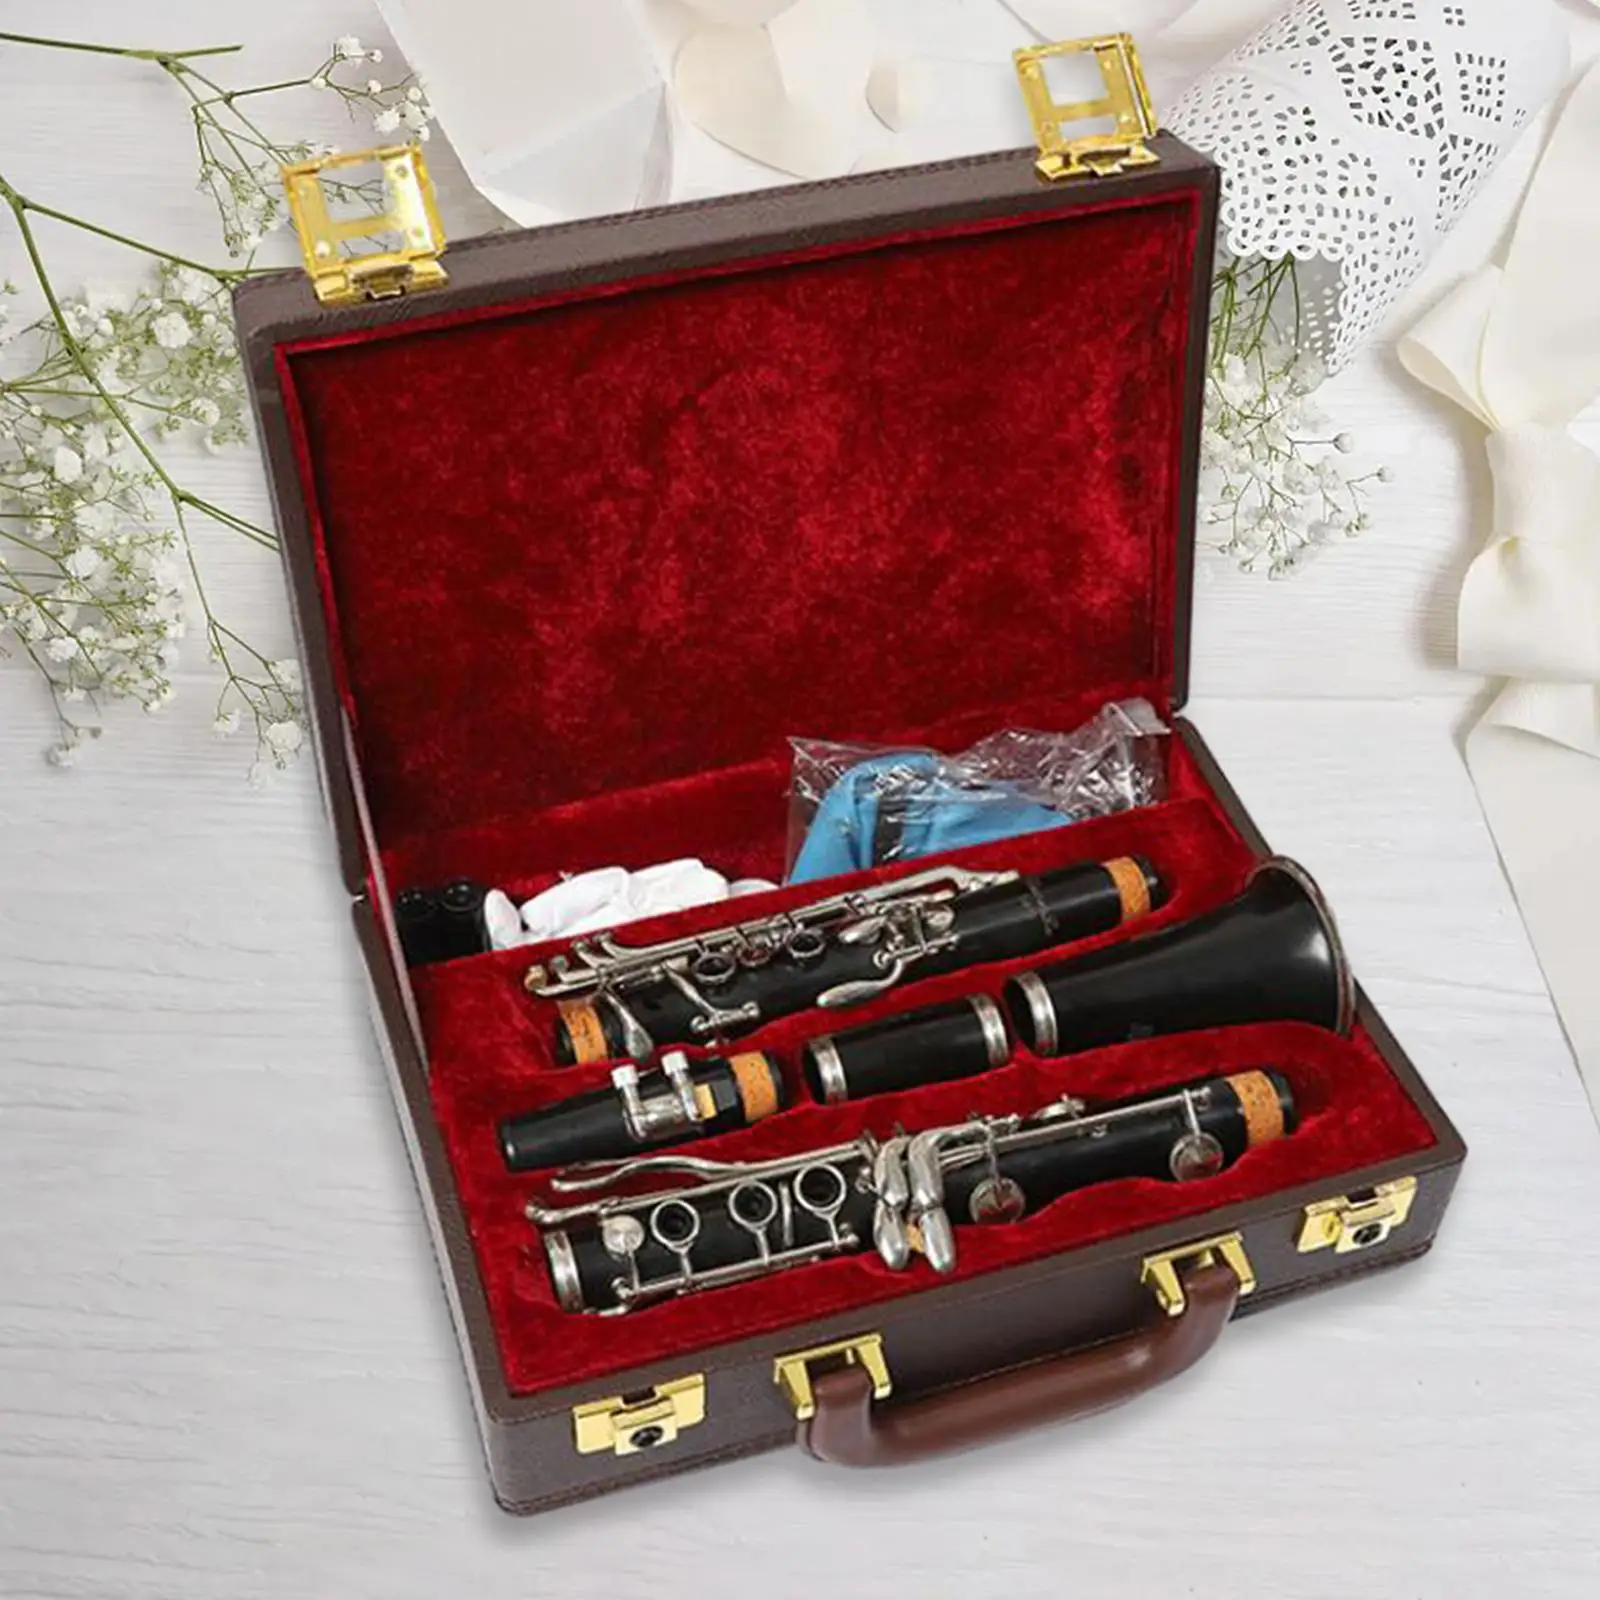 Portable PU Leather Flute Case Lightweight Storage Box Durable Water Resistant Hard Clarinet Box Case Protection Accessories